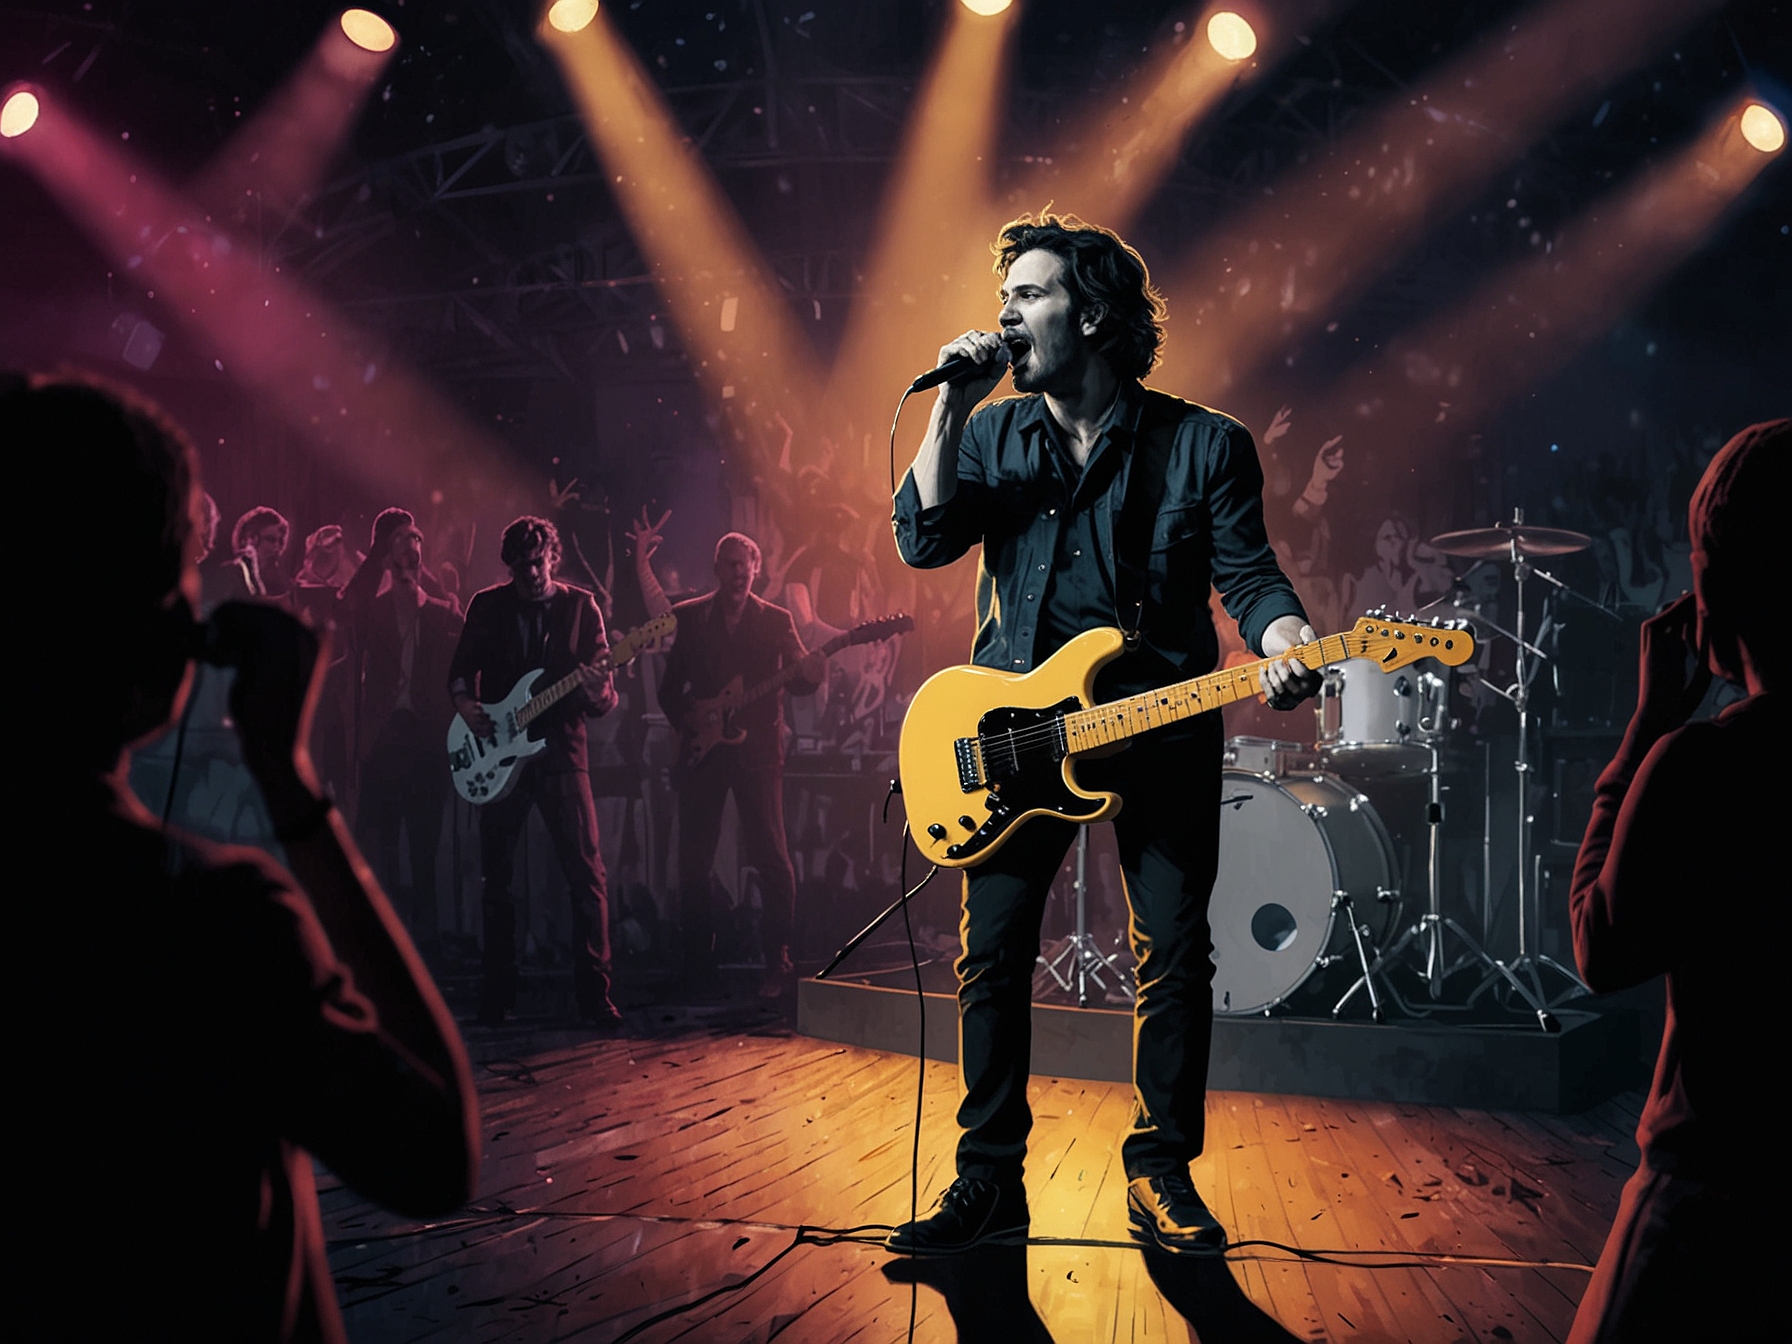 An image of the iconic band performing live on stage, with vibrant lighting and an enthusiastic crowd, capturing the energy of their anticipated UK tour.